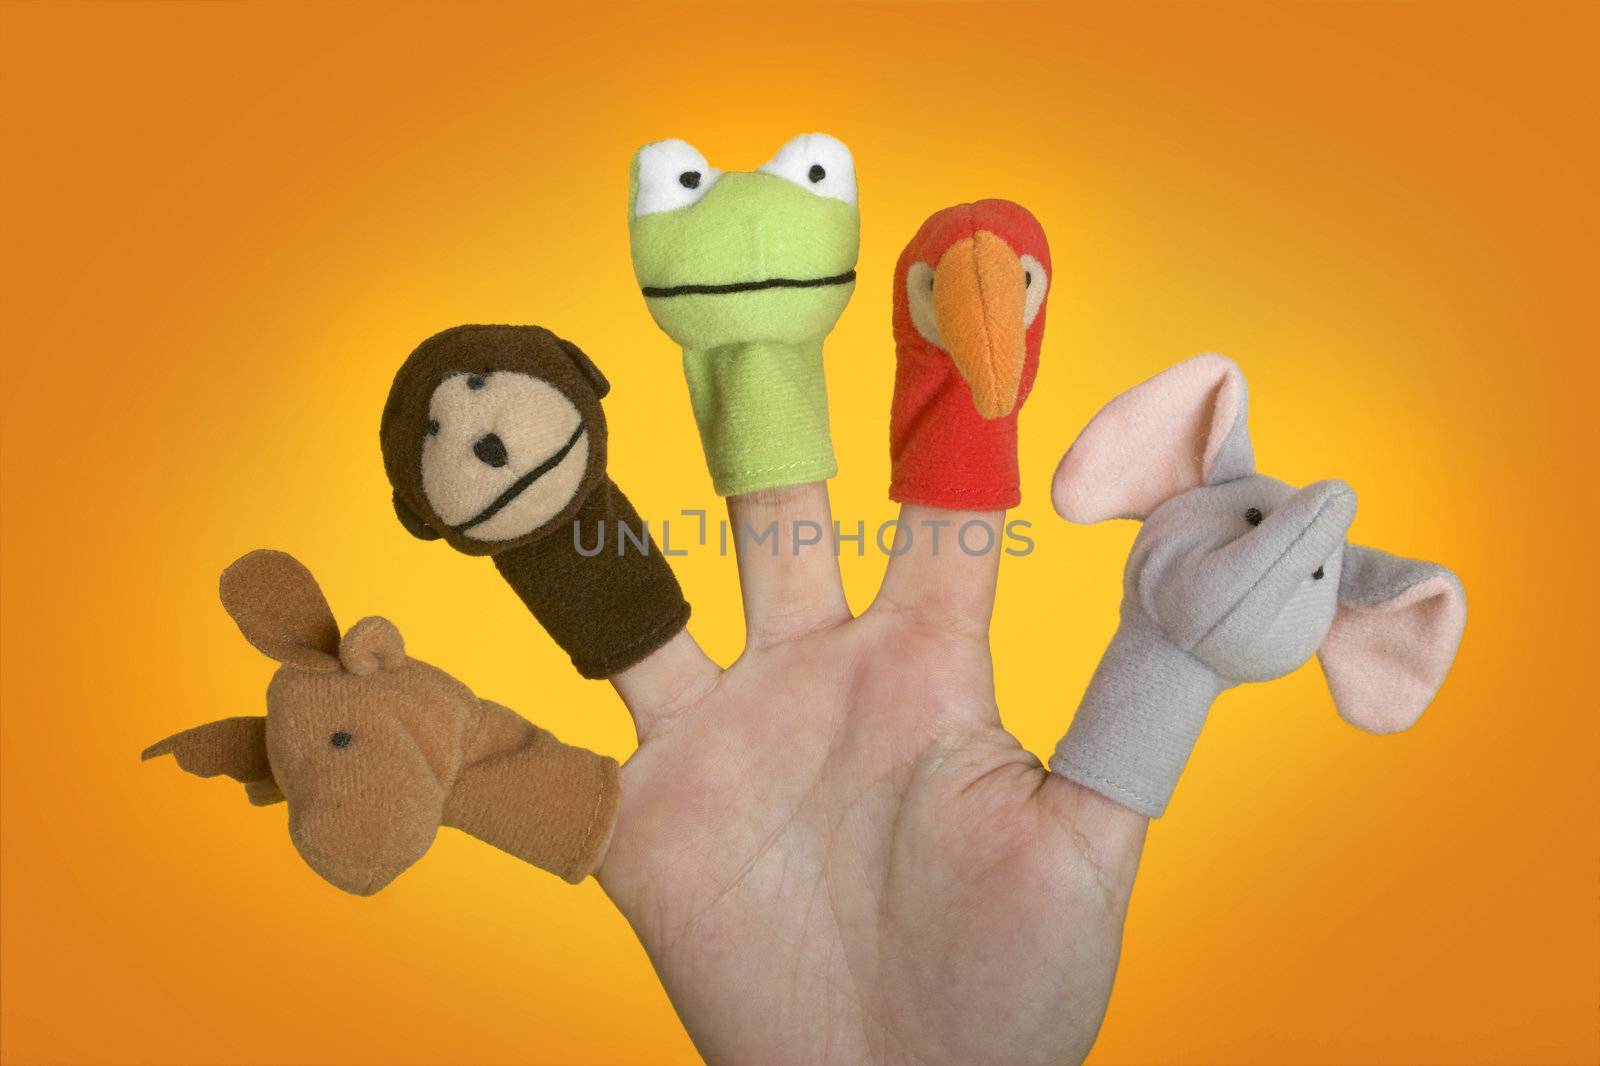 Female hand playing with puppets on the fingers